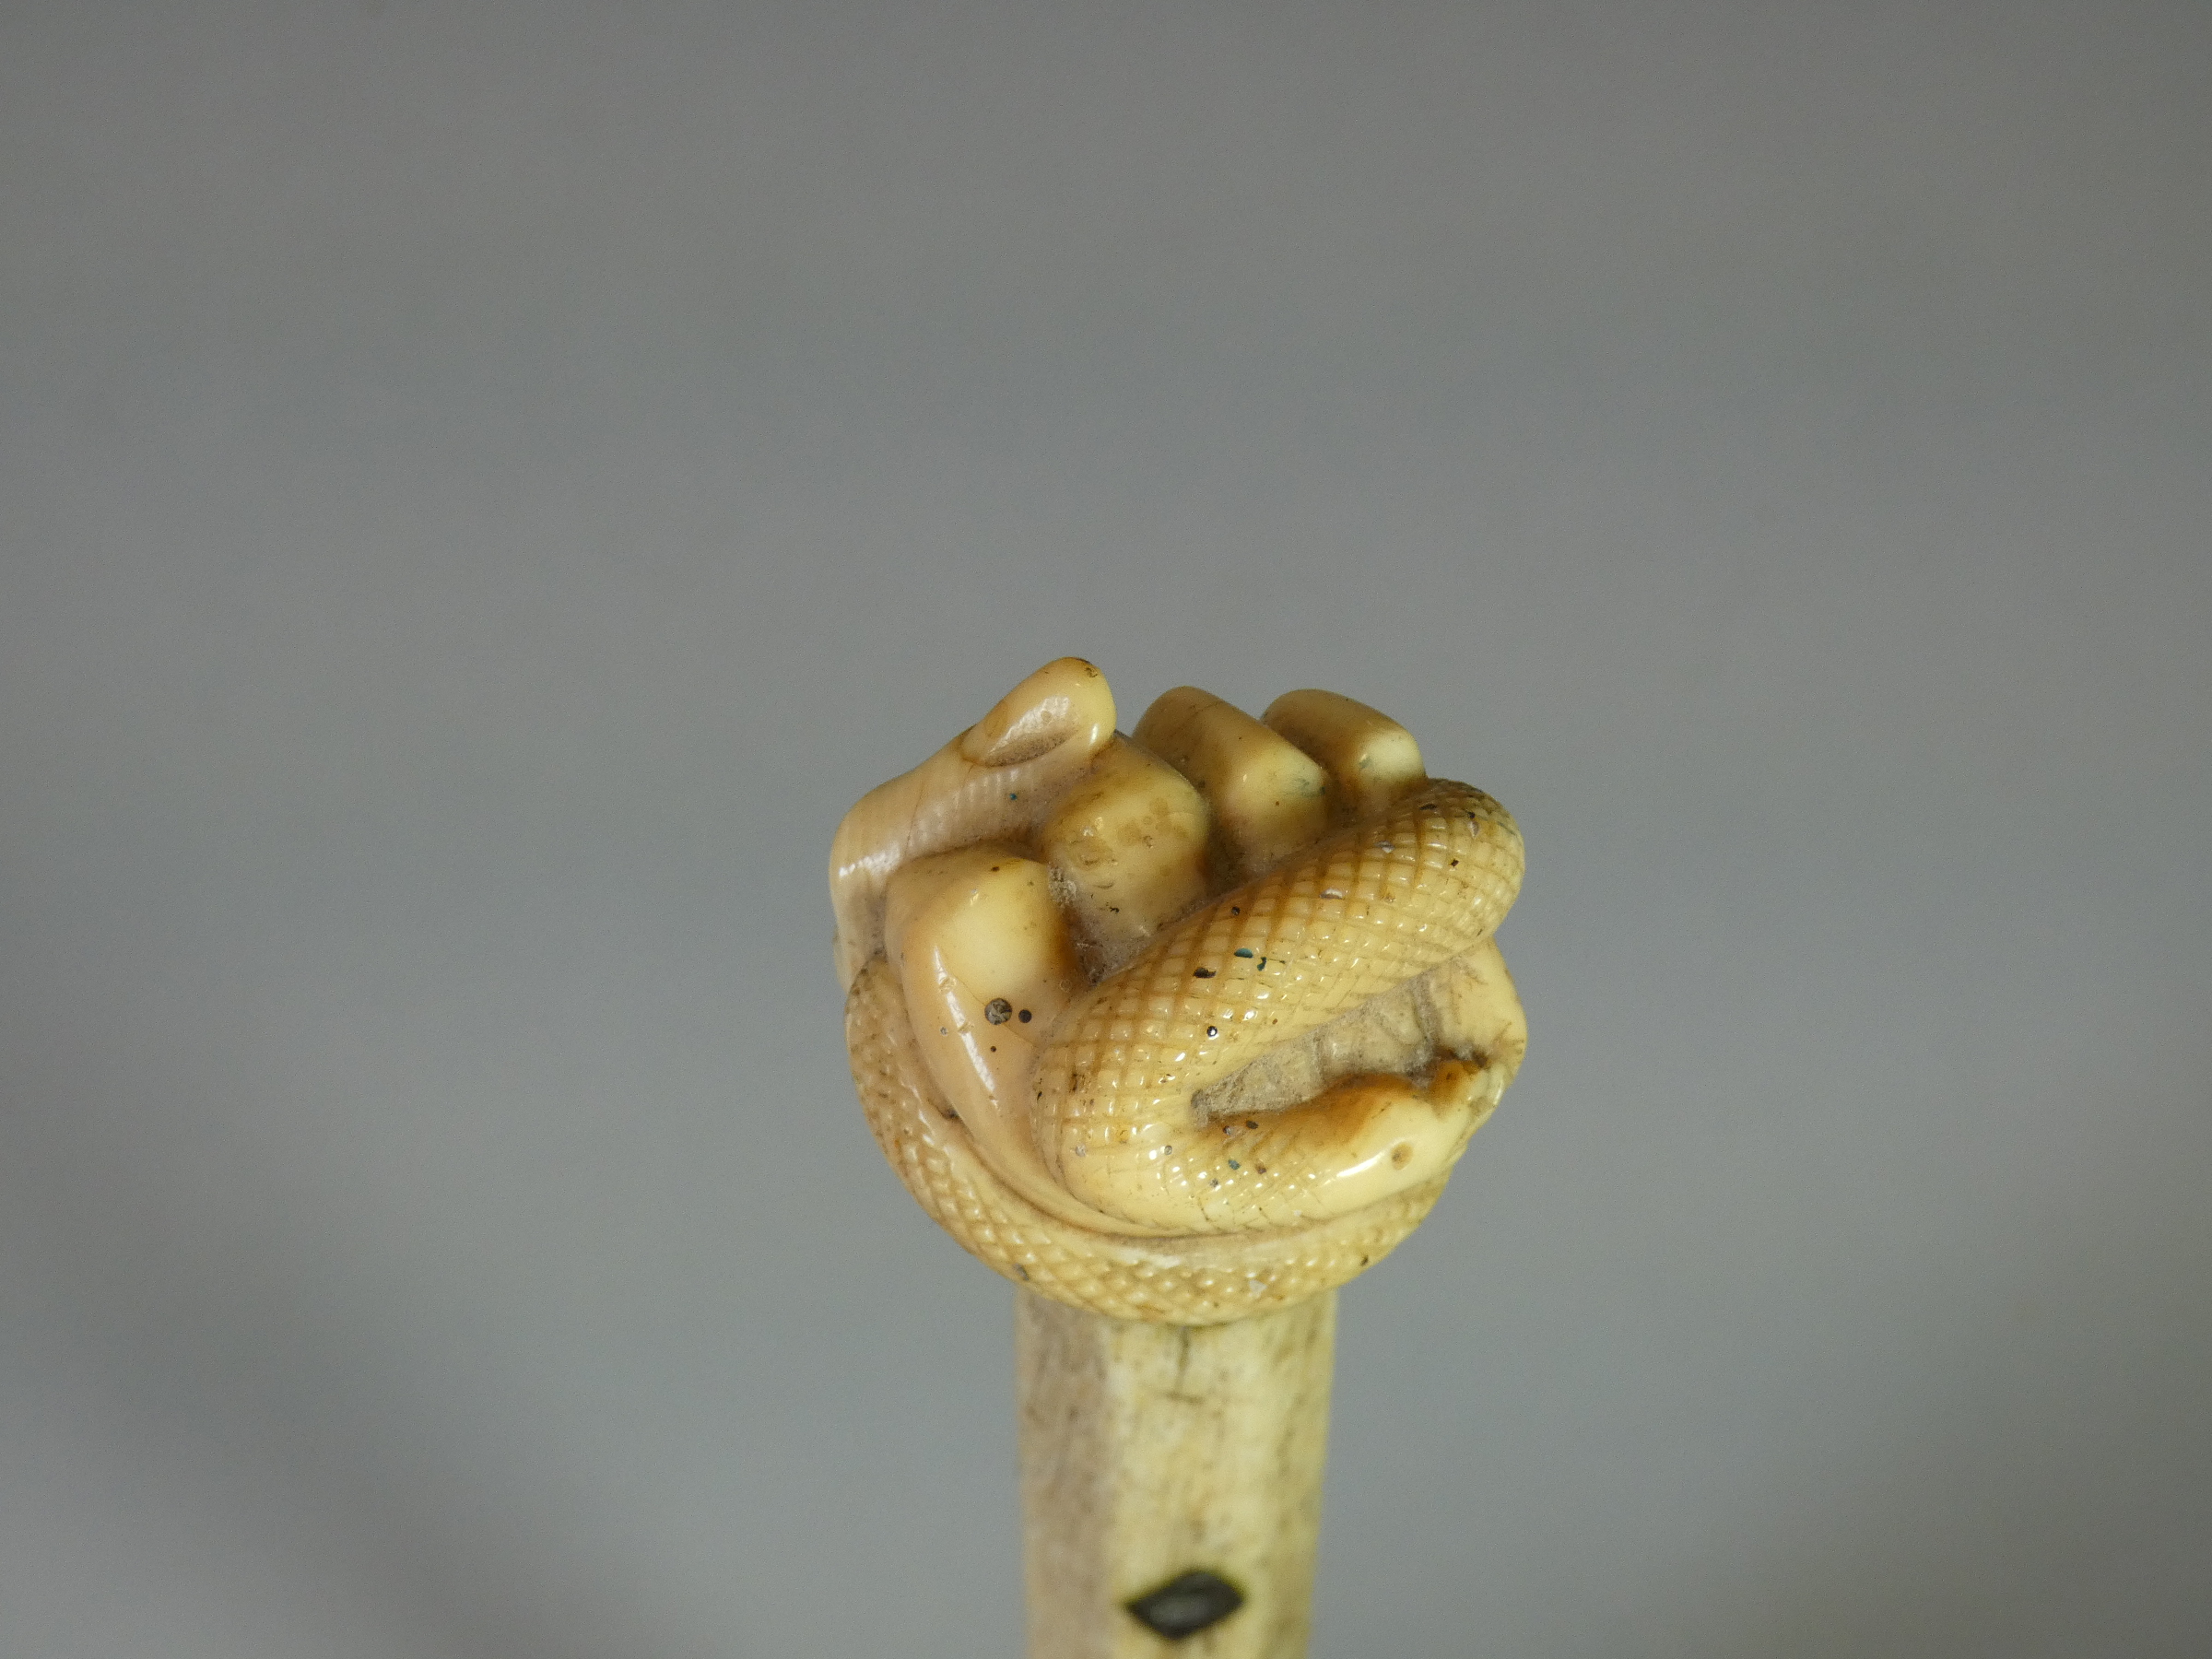 A 19th century whale jaw-bone & ivory-handled walking stick carved with a fist clutching a - Image 5 of 7